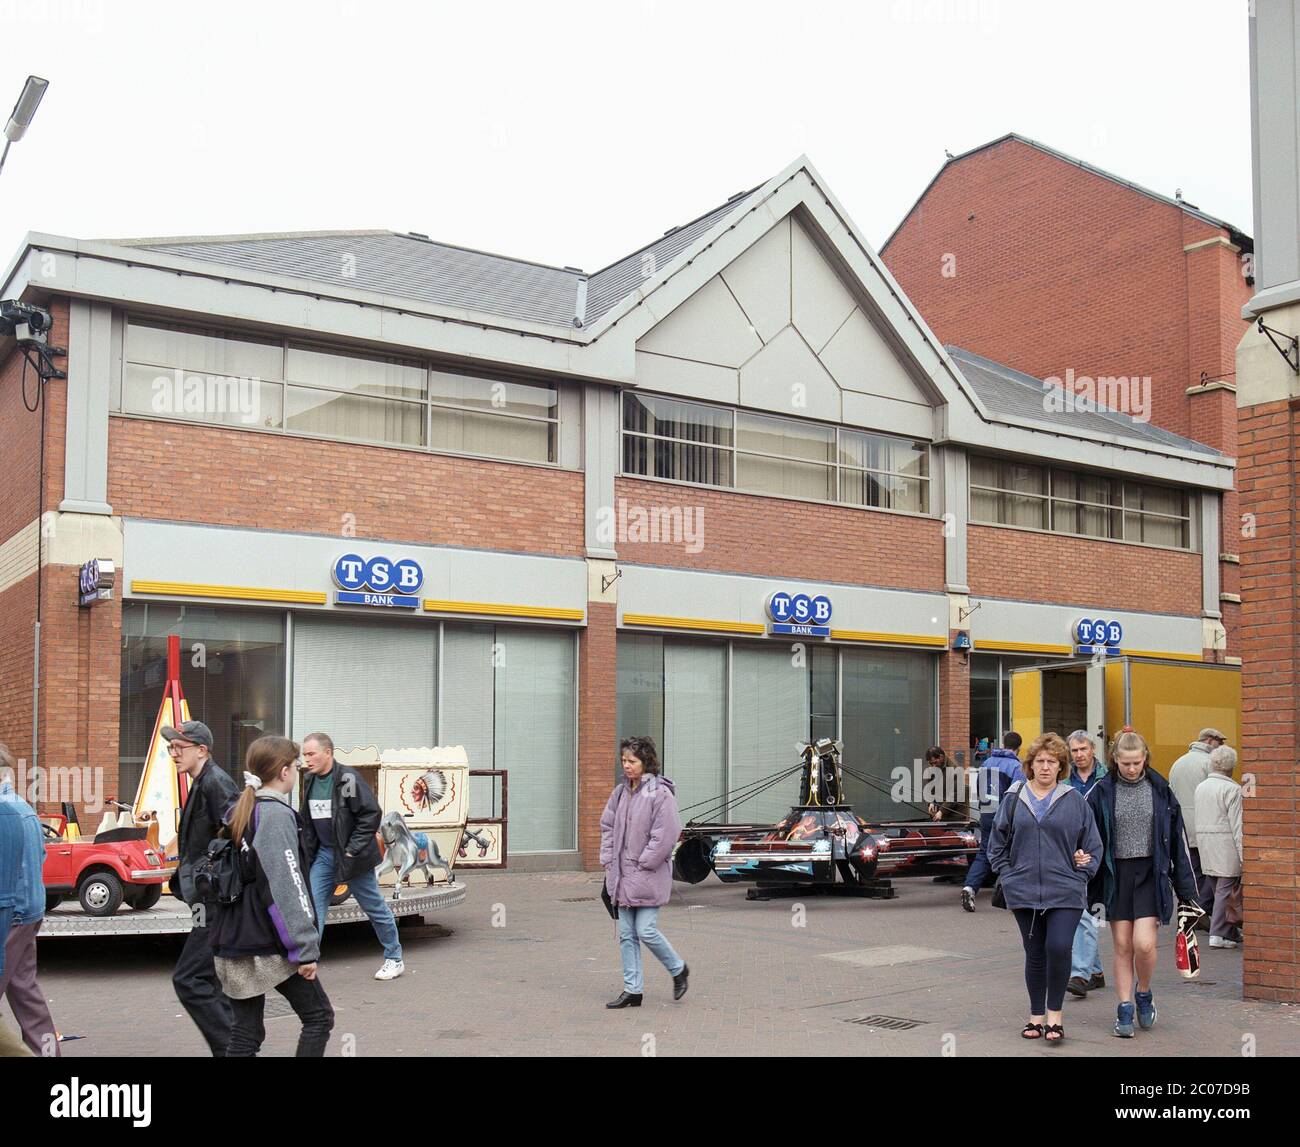 1996, The Spinning Gate Shopping Centre, Leigh, Lancashire, North West England, UK Stock Photo